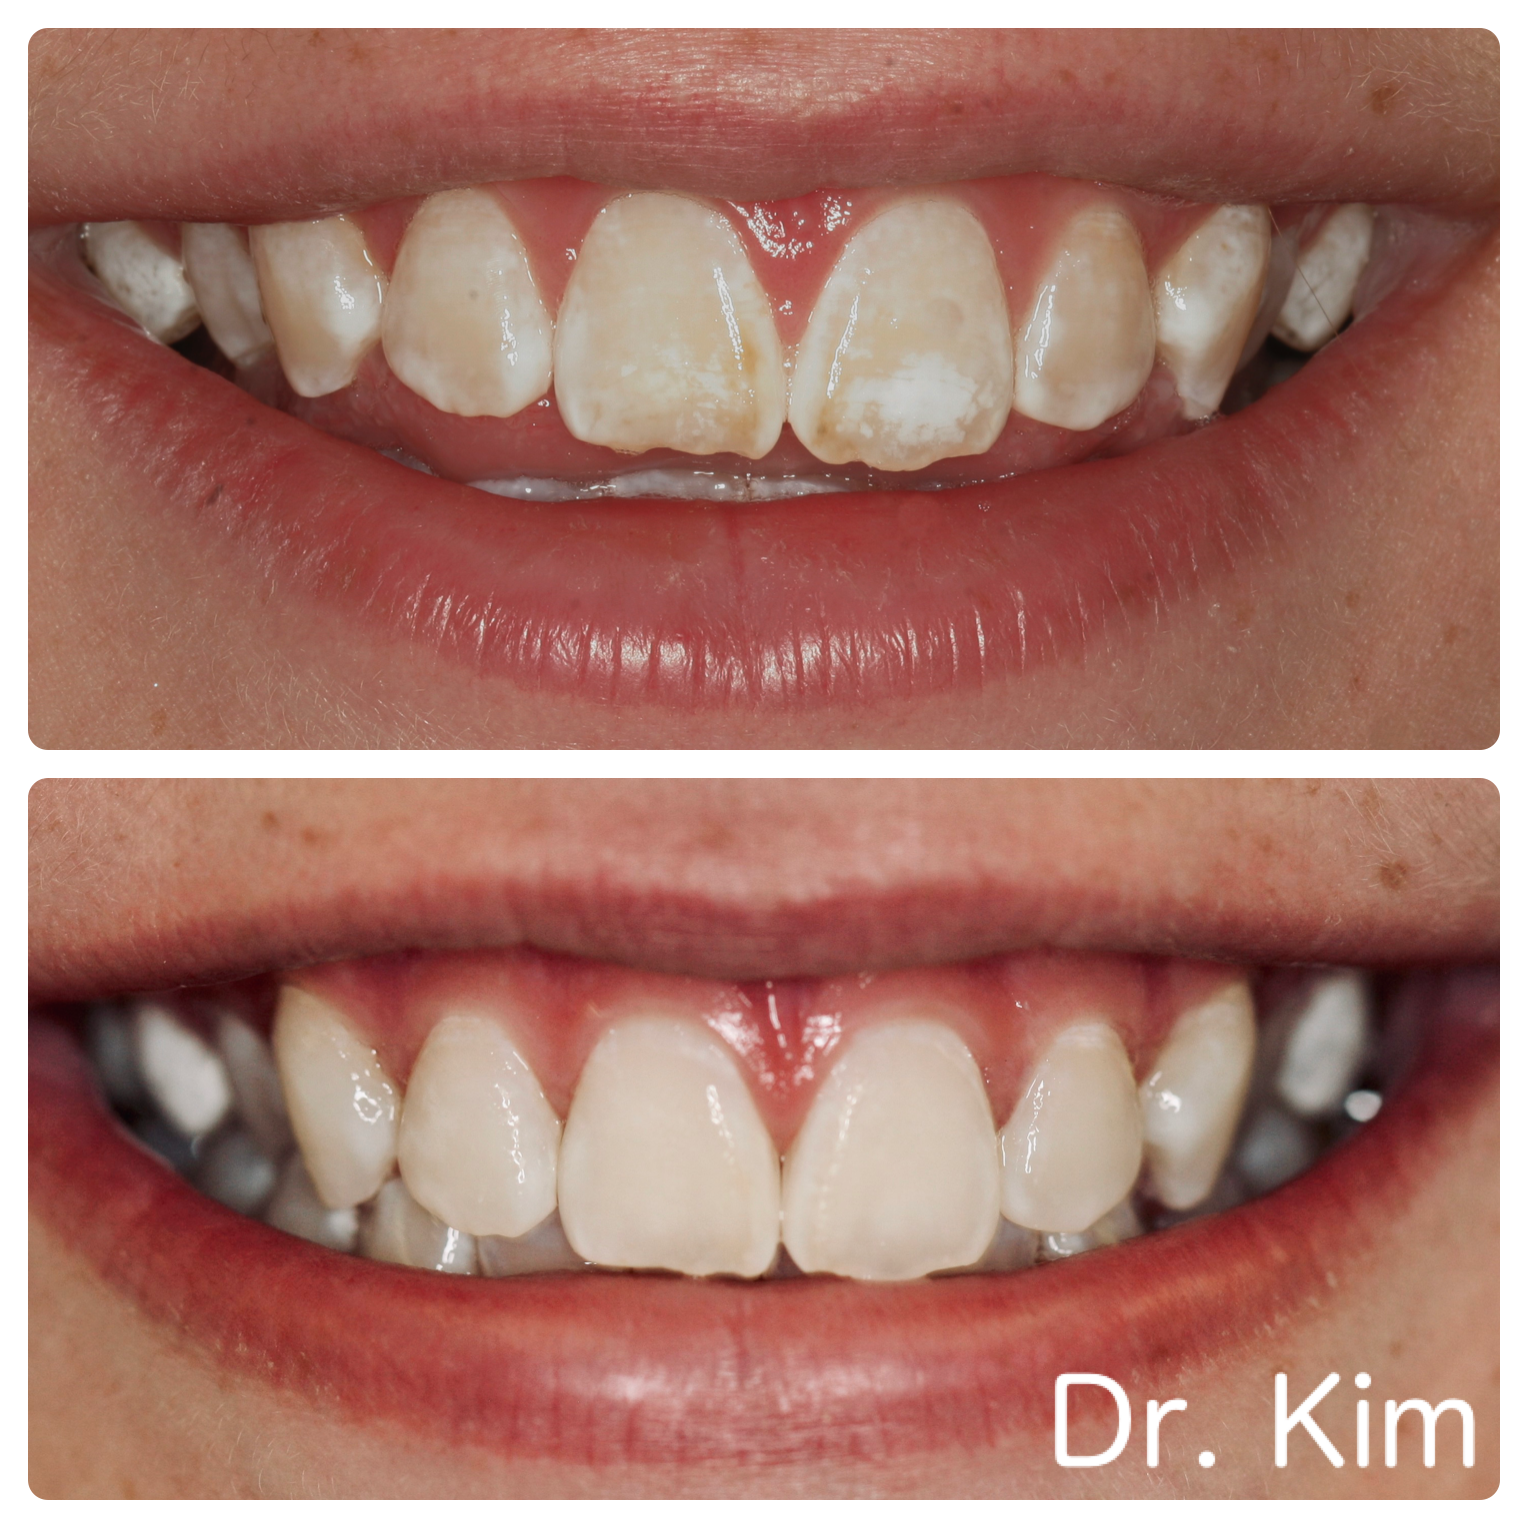 Removed white and brown spots without anesthetic or drilling